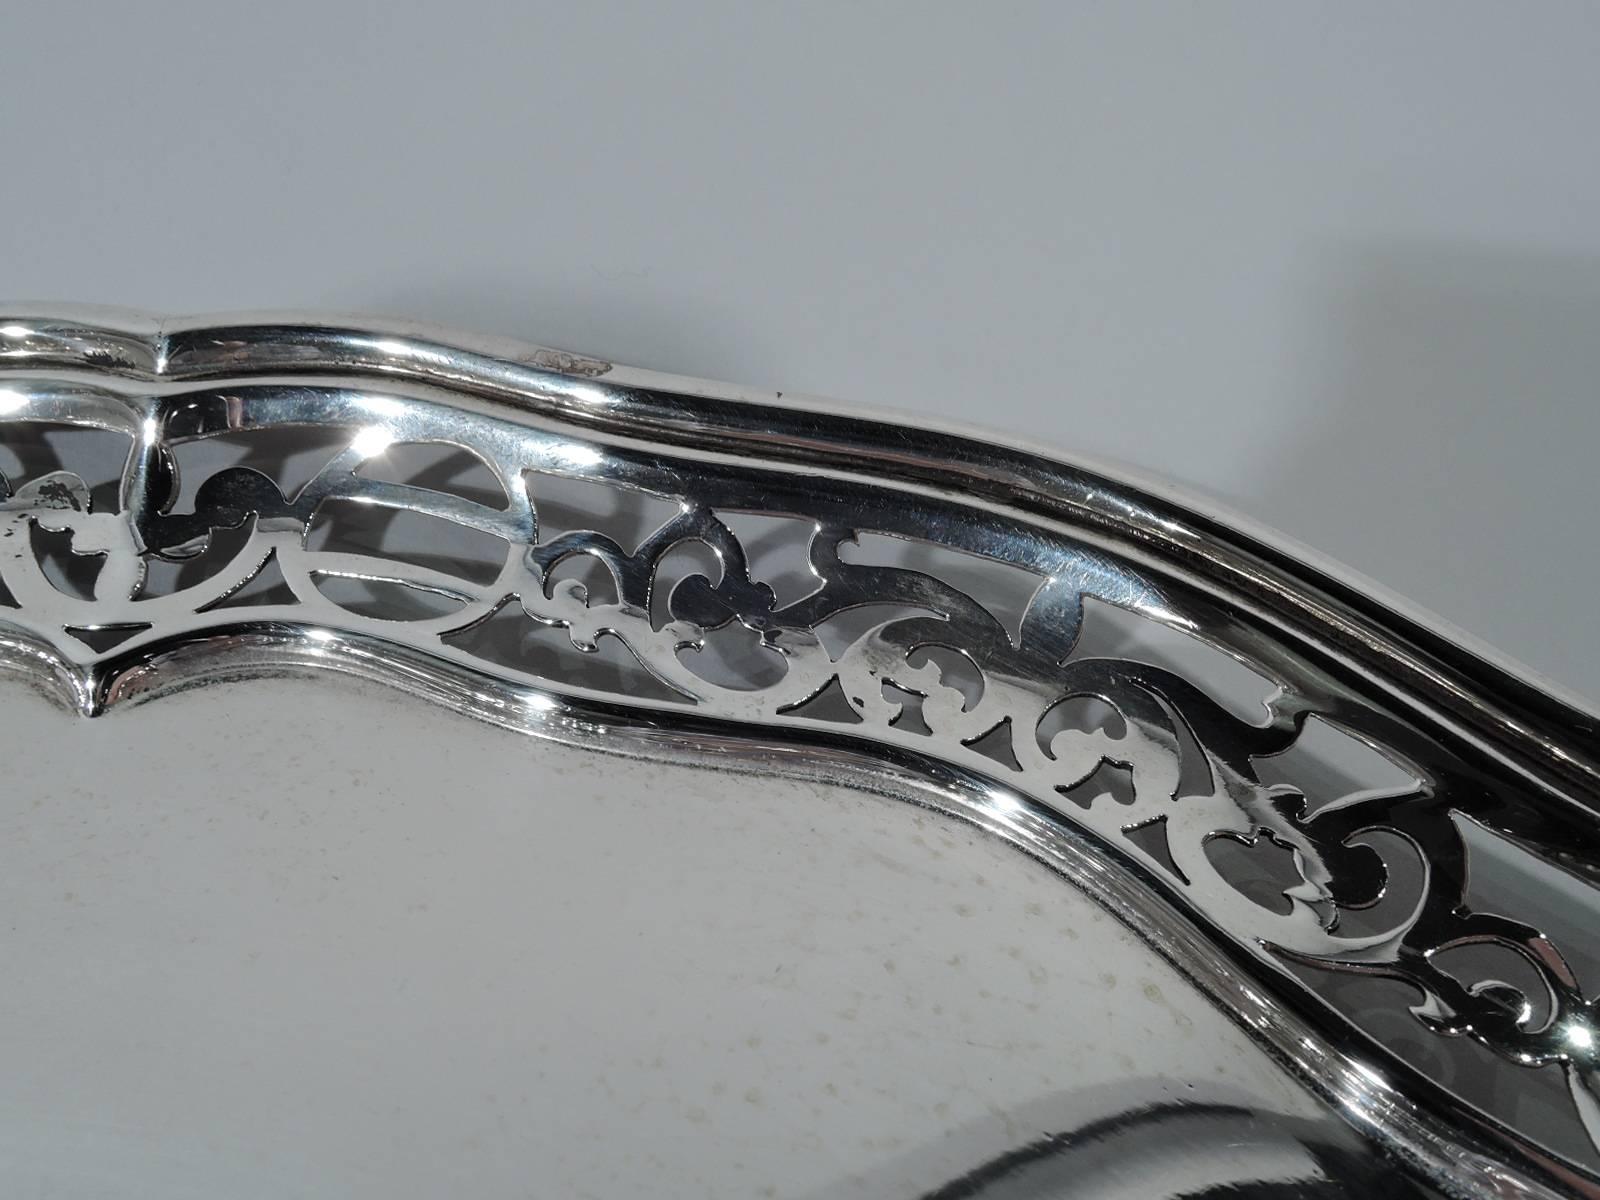 Edwardian sterling silver tray. Made by Theodore B. Starr in New York. Shaped circle with solid well and molded rim. Sides tapering with scrolled and geometric piercing. Hallmark includes no. 1224. Weight: 17.8 troy ounces.